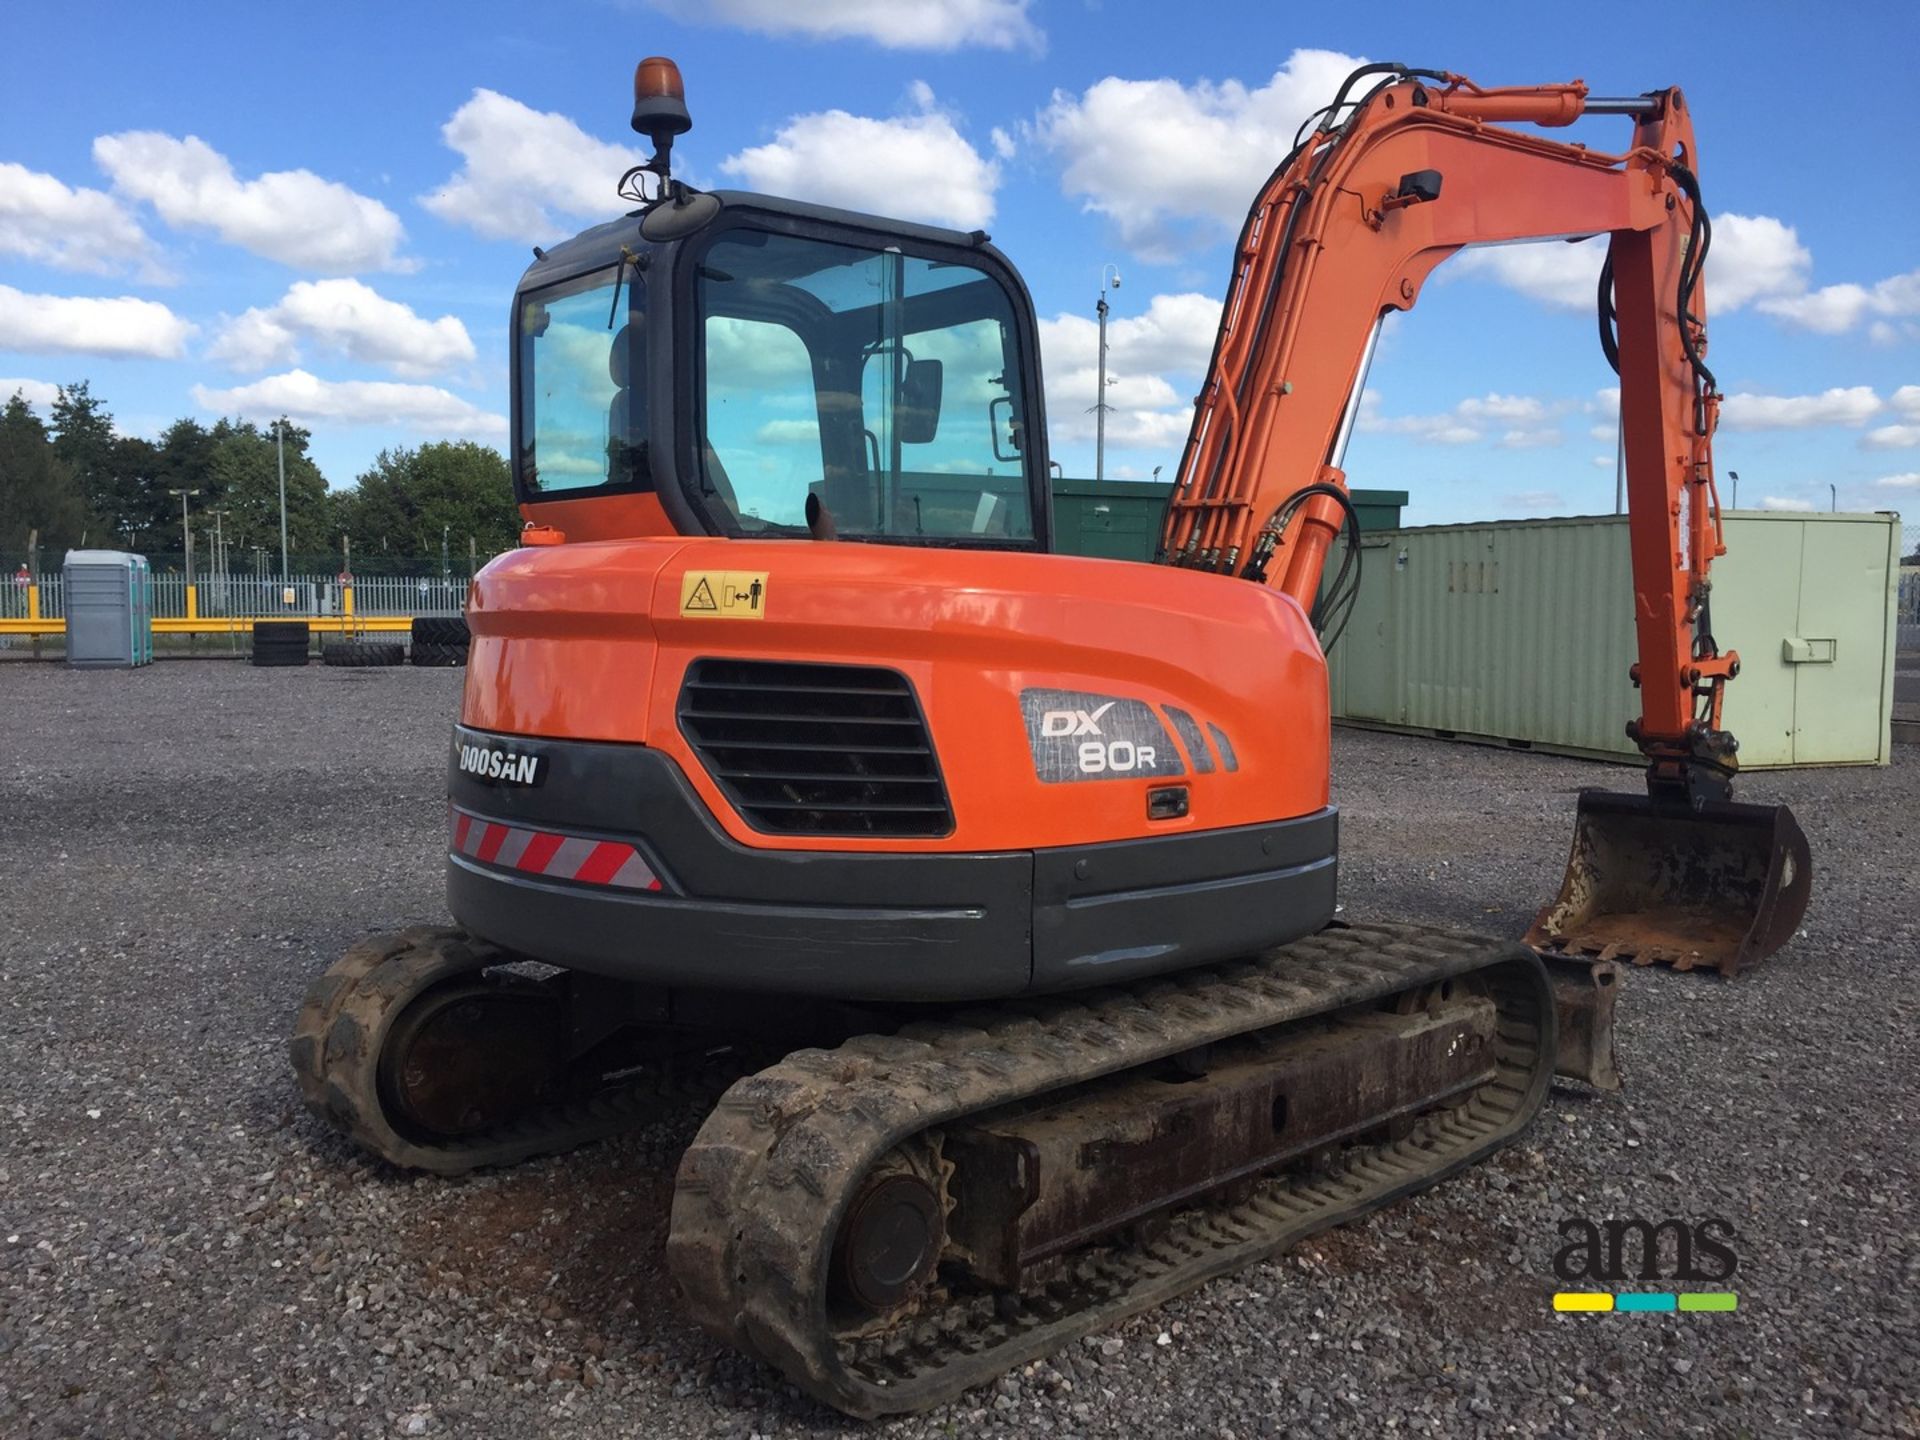 2010, Doosan DX80R Excavator Serial No. 50284, Hours 5040 approx. Cab, Rubber Track, Quick Hitch - Image 9 of 18